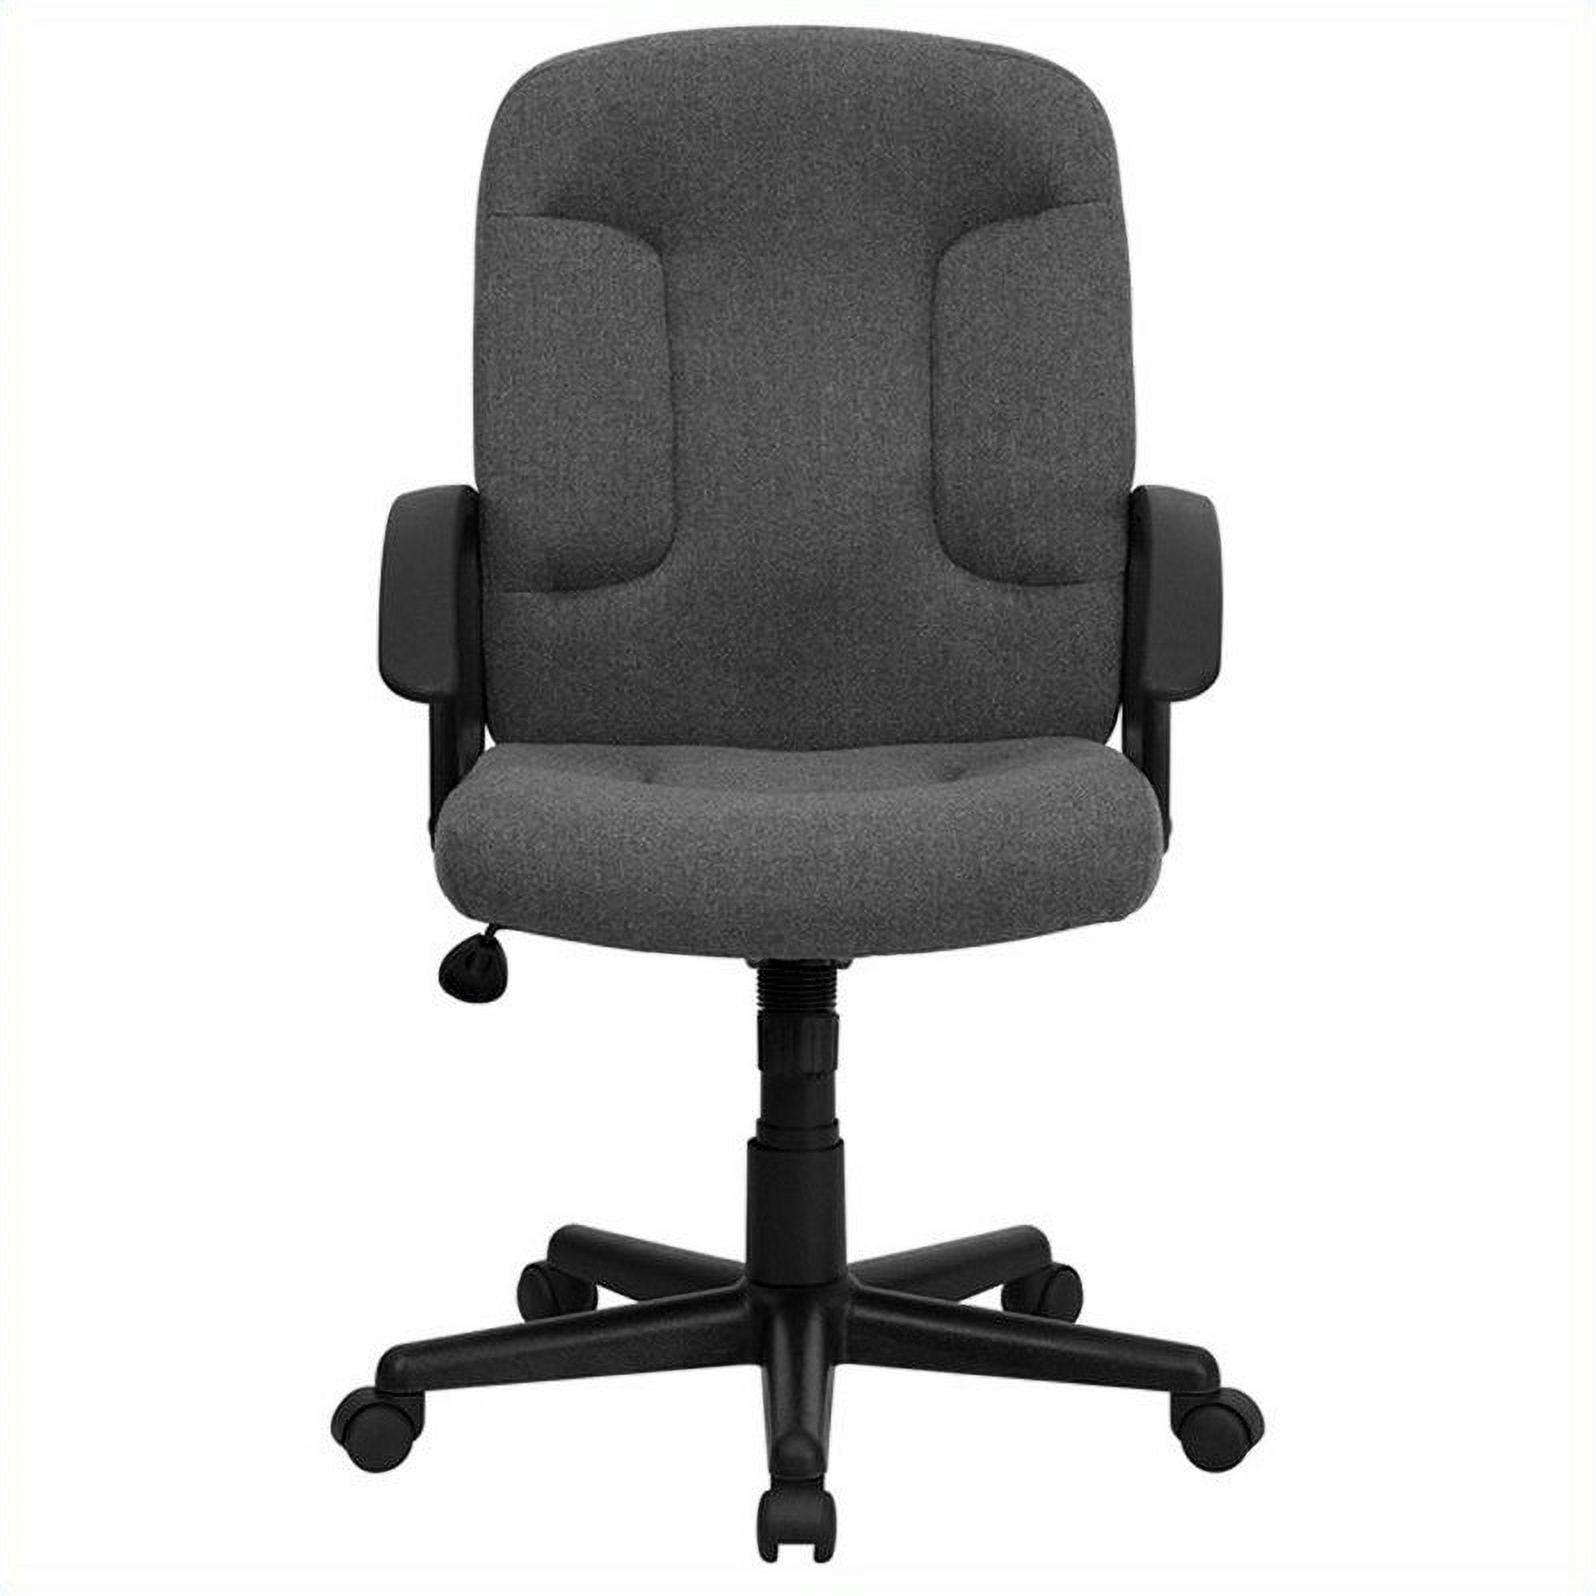 ErgoExec Mid-Back Gray Fabric Swivel Executive Chair with Nylon Arms